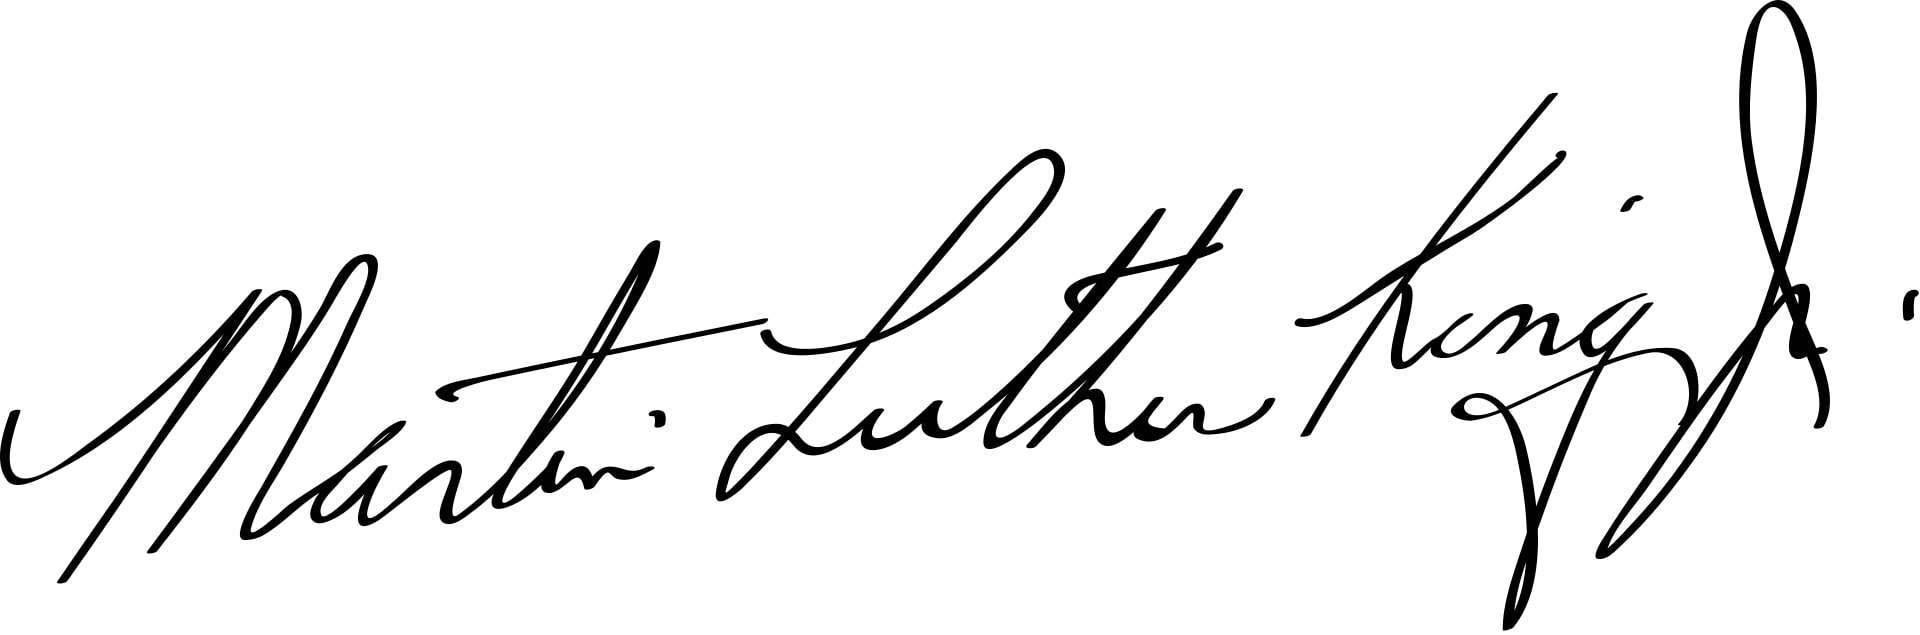 Martin Luther King Jr. Signature